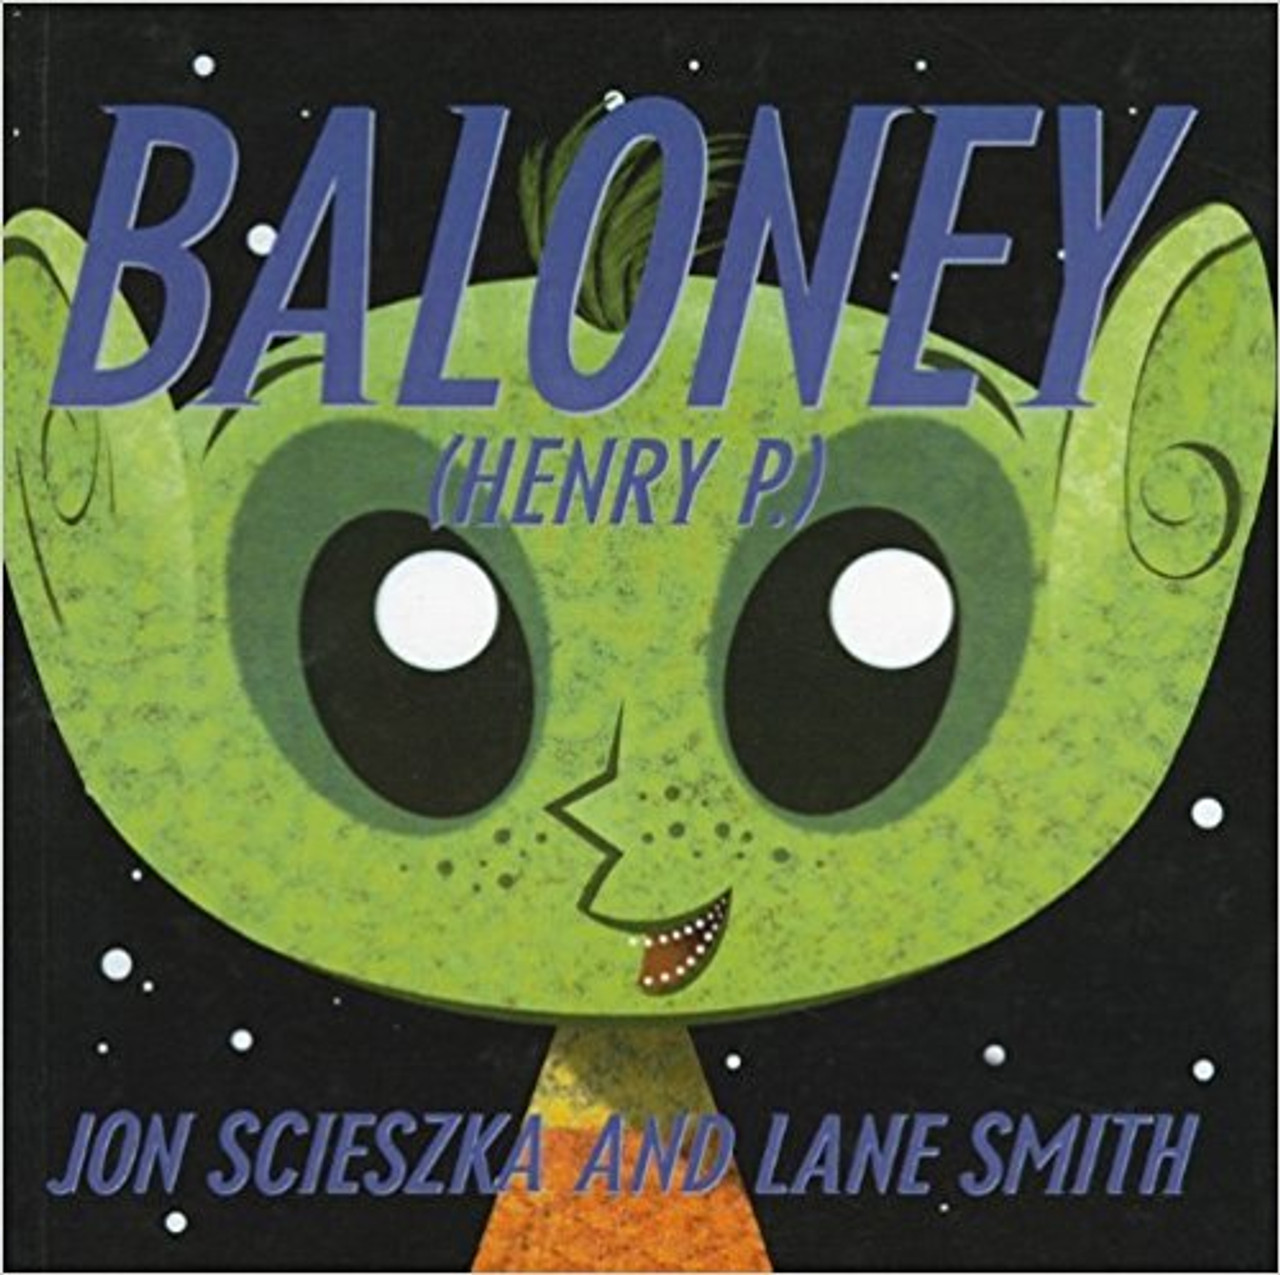 The unbelievable trip into Henry's wild universe may be the most original excuse ever for being late for szkola. Or it might just be Baloney. Henry P. Baloney.